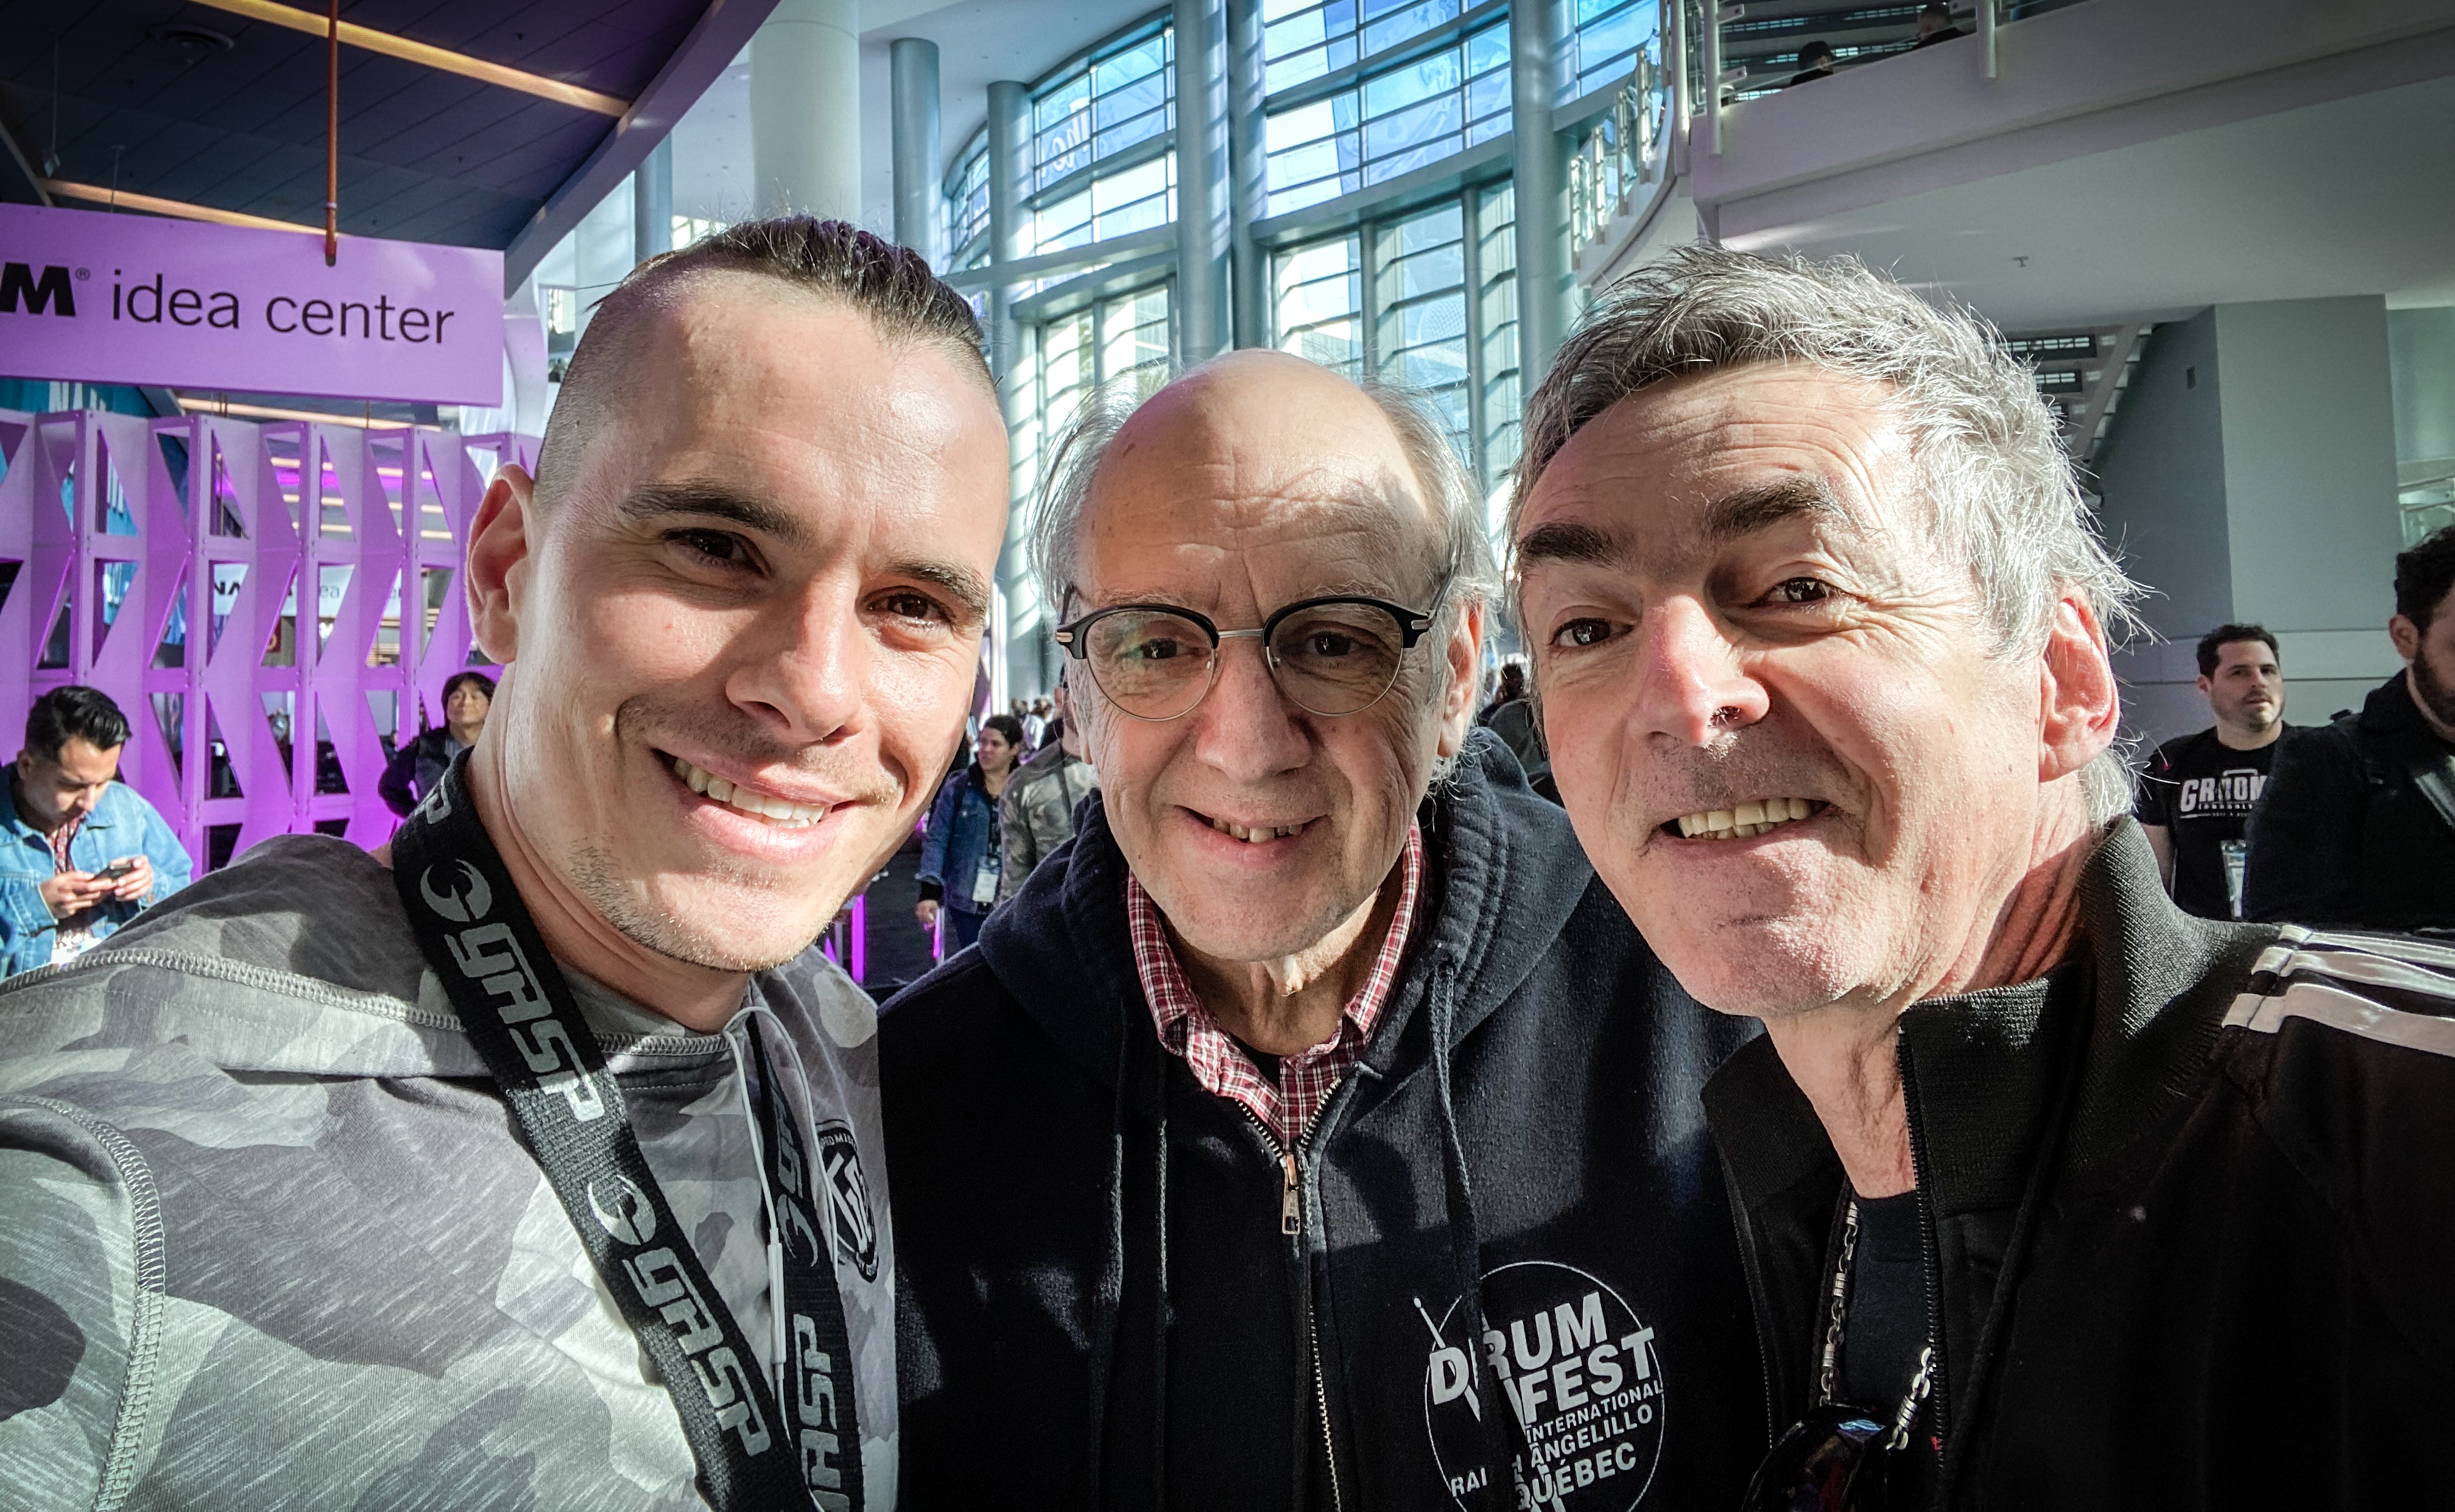 Oli at NAMM 2020 w/ fellow Canadians drummers Ralph Angelilo & Mario Roy